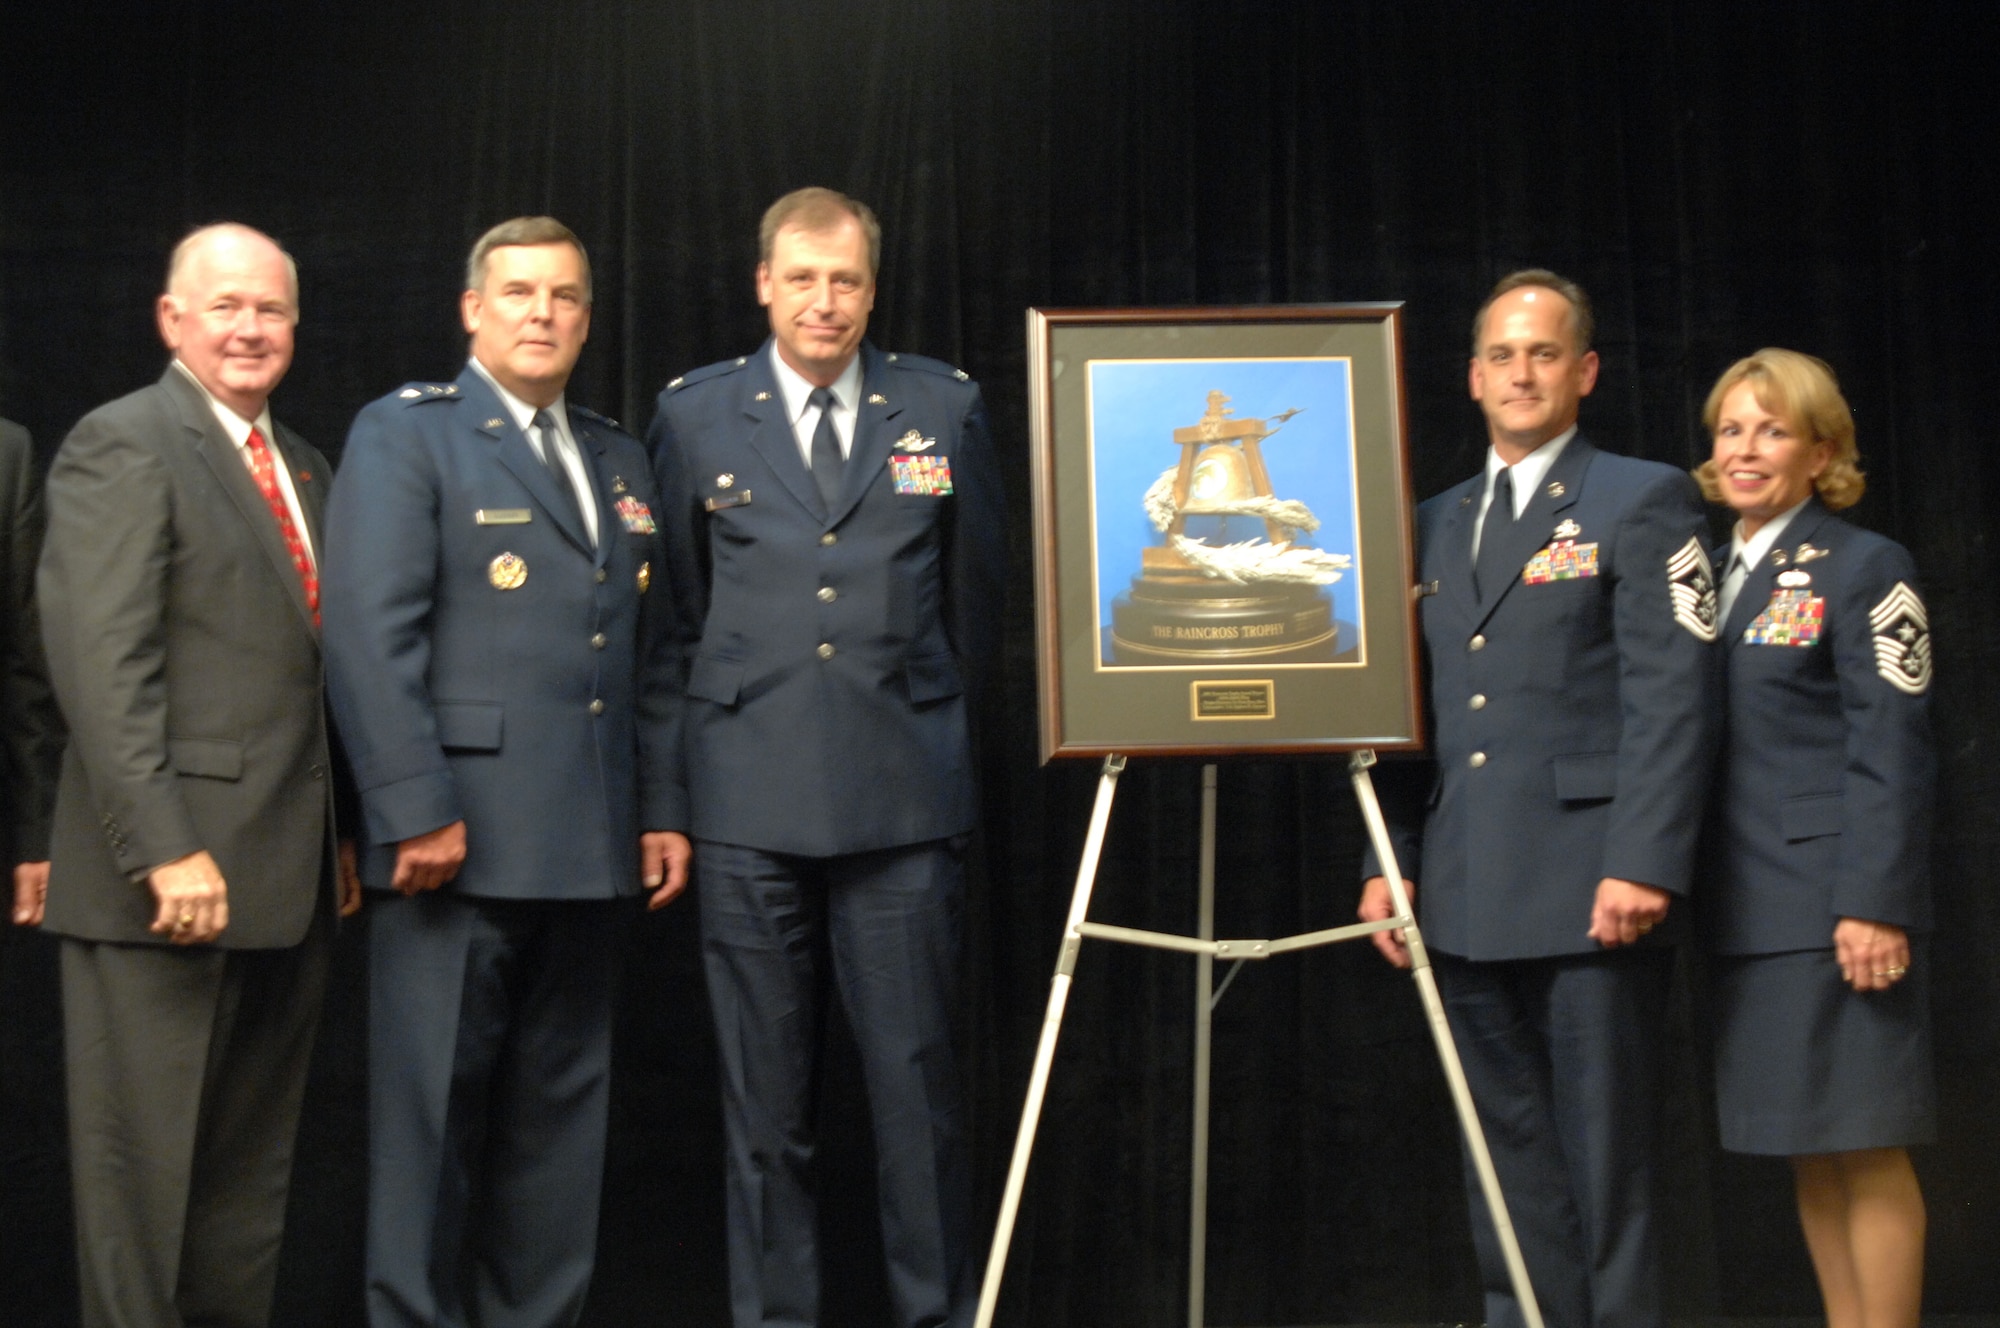 From left to right, Lieutenant General Jimmy Sherrard (ret), Major General Bob Duignan, Commander, Fourth Air Force, Colonel Stephen Goeman, and Command Chief Master Sergeant Aaron Mouser with the 445th Airlift Wing from Wright Patterson AFB, Ohio, along with Fourth Air Force Command Chief Master Sergeant Patricia Thornton, with the 2007 Raincross Trophy Award presented at the 10th Annual Raincross Trophy Dinner held at the Riverside Convention Center in Riverside, California, on June 11, 2008.(USAF photo by Senior Master Sergeant Kim Allain)(released)